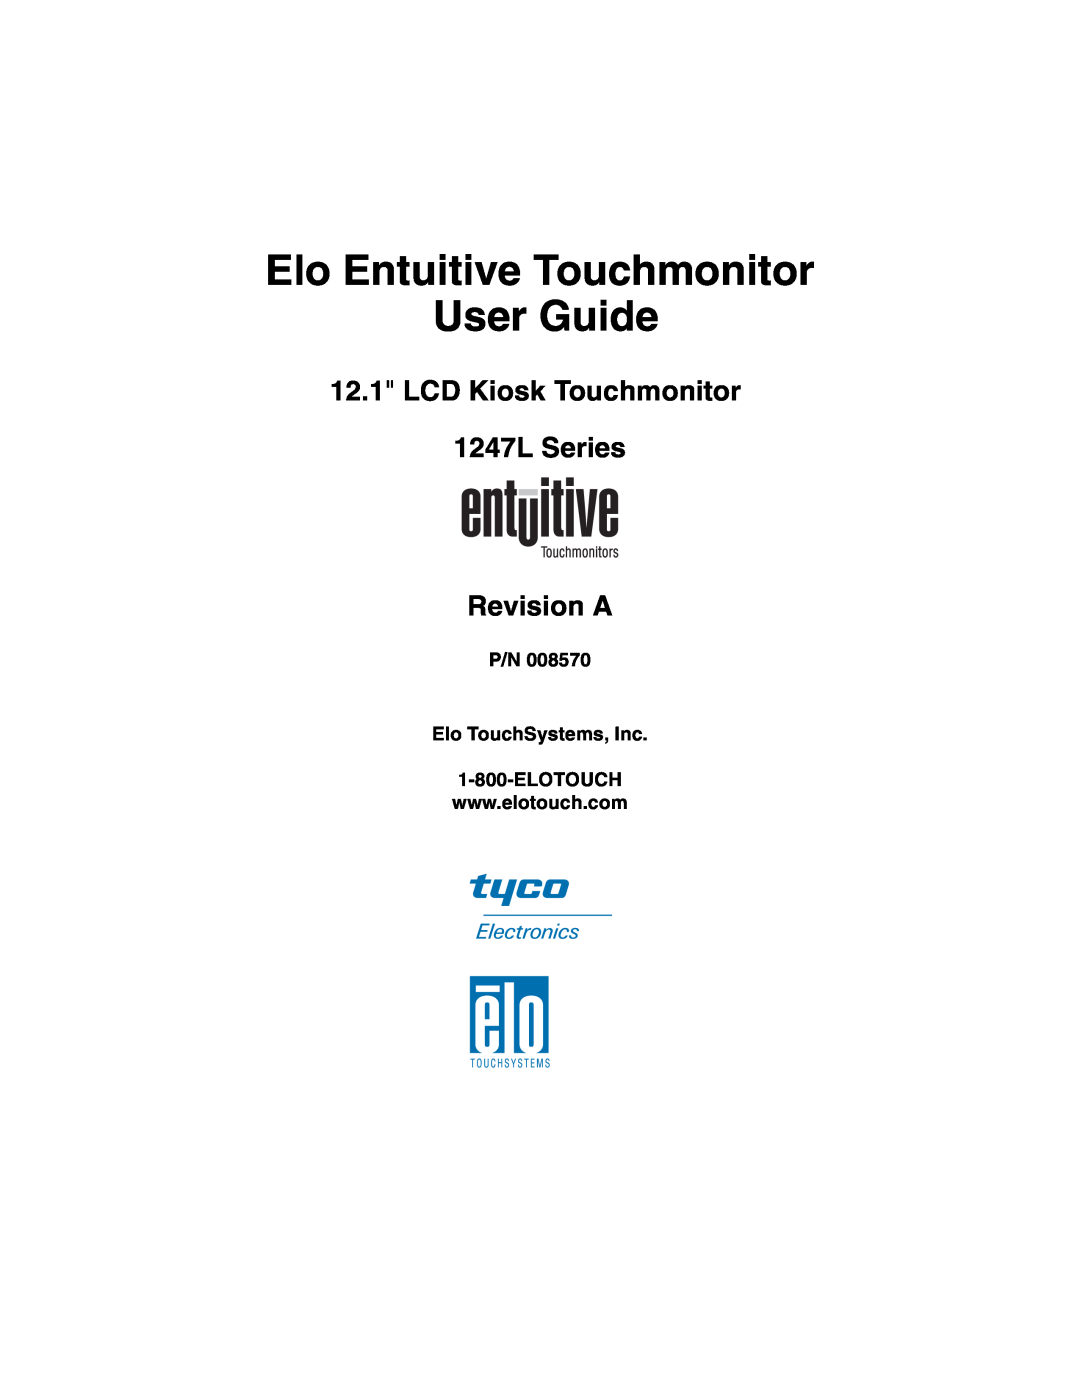 Elo TouchSystems manual Elo Entuitive Touchmonitor User Guide, LCD Kiosk Touchmonitor 1247L Series Revision A 